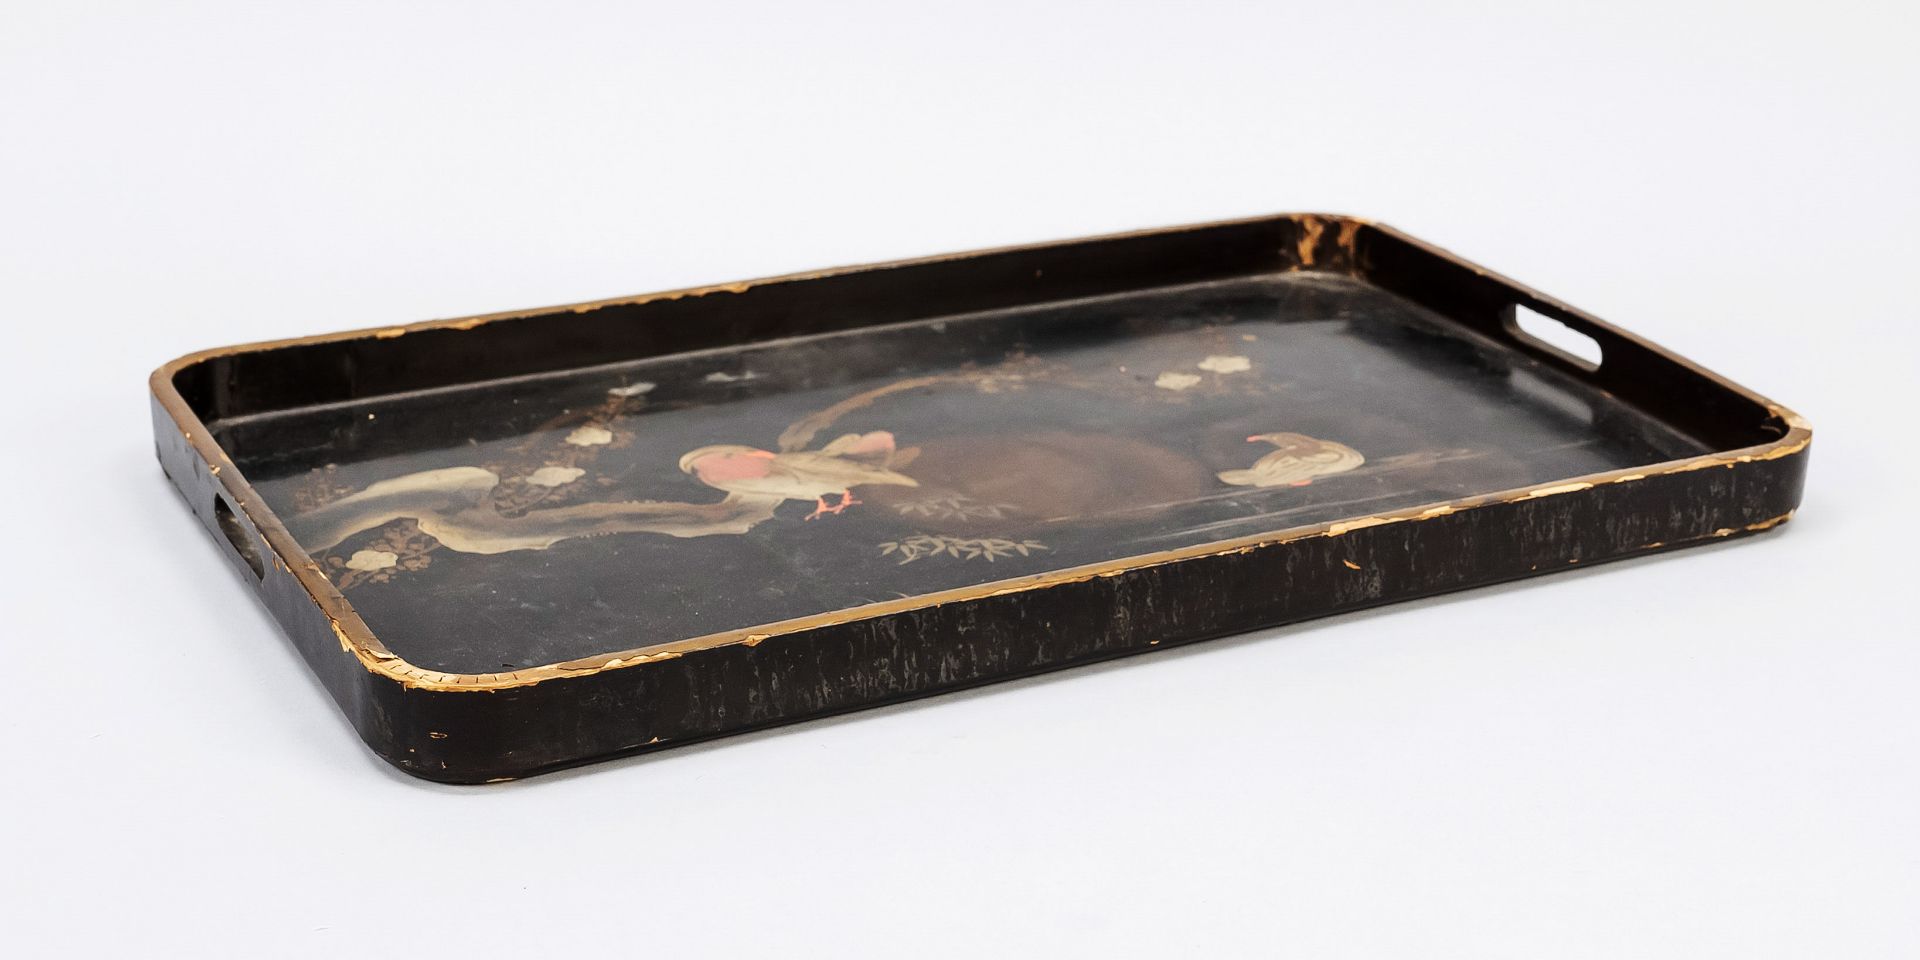 Mandarin duck tray, Japan, early 20th century, black lacquered wooden tray with handles, gold and - Image 2 of 2